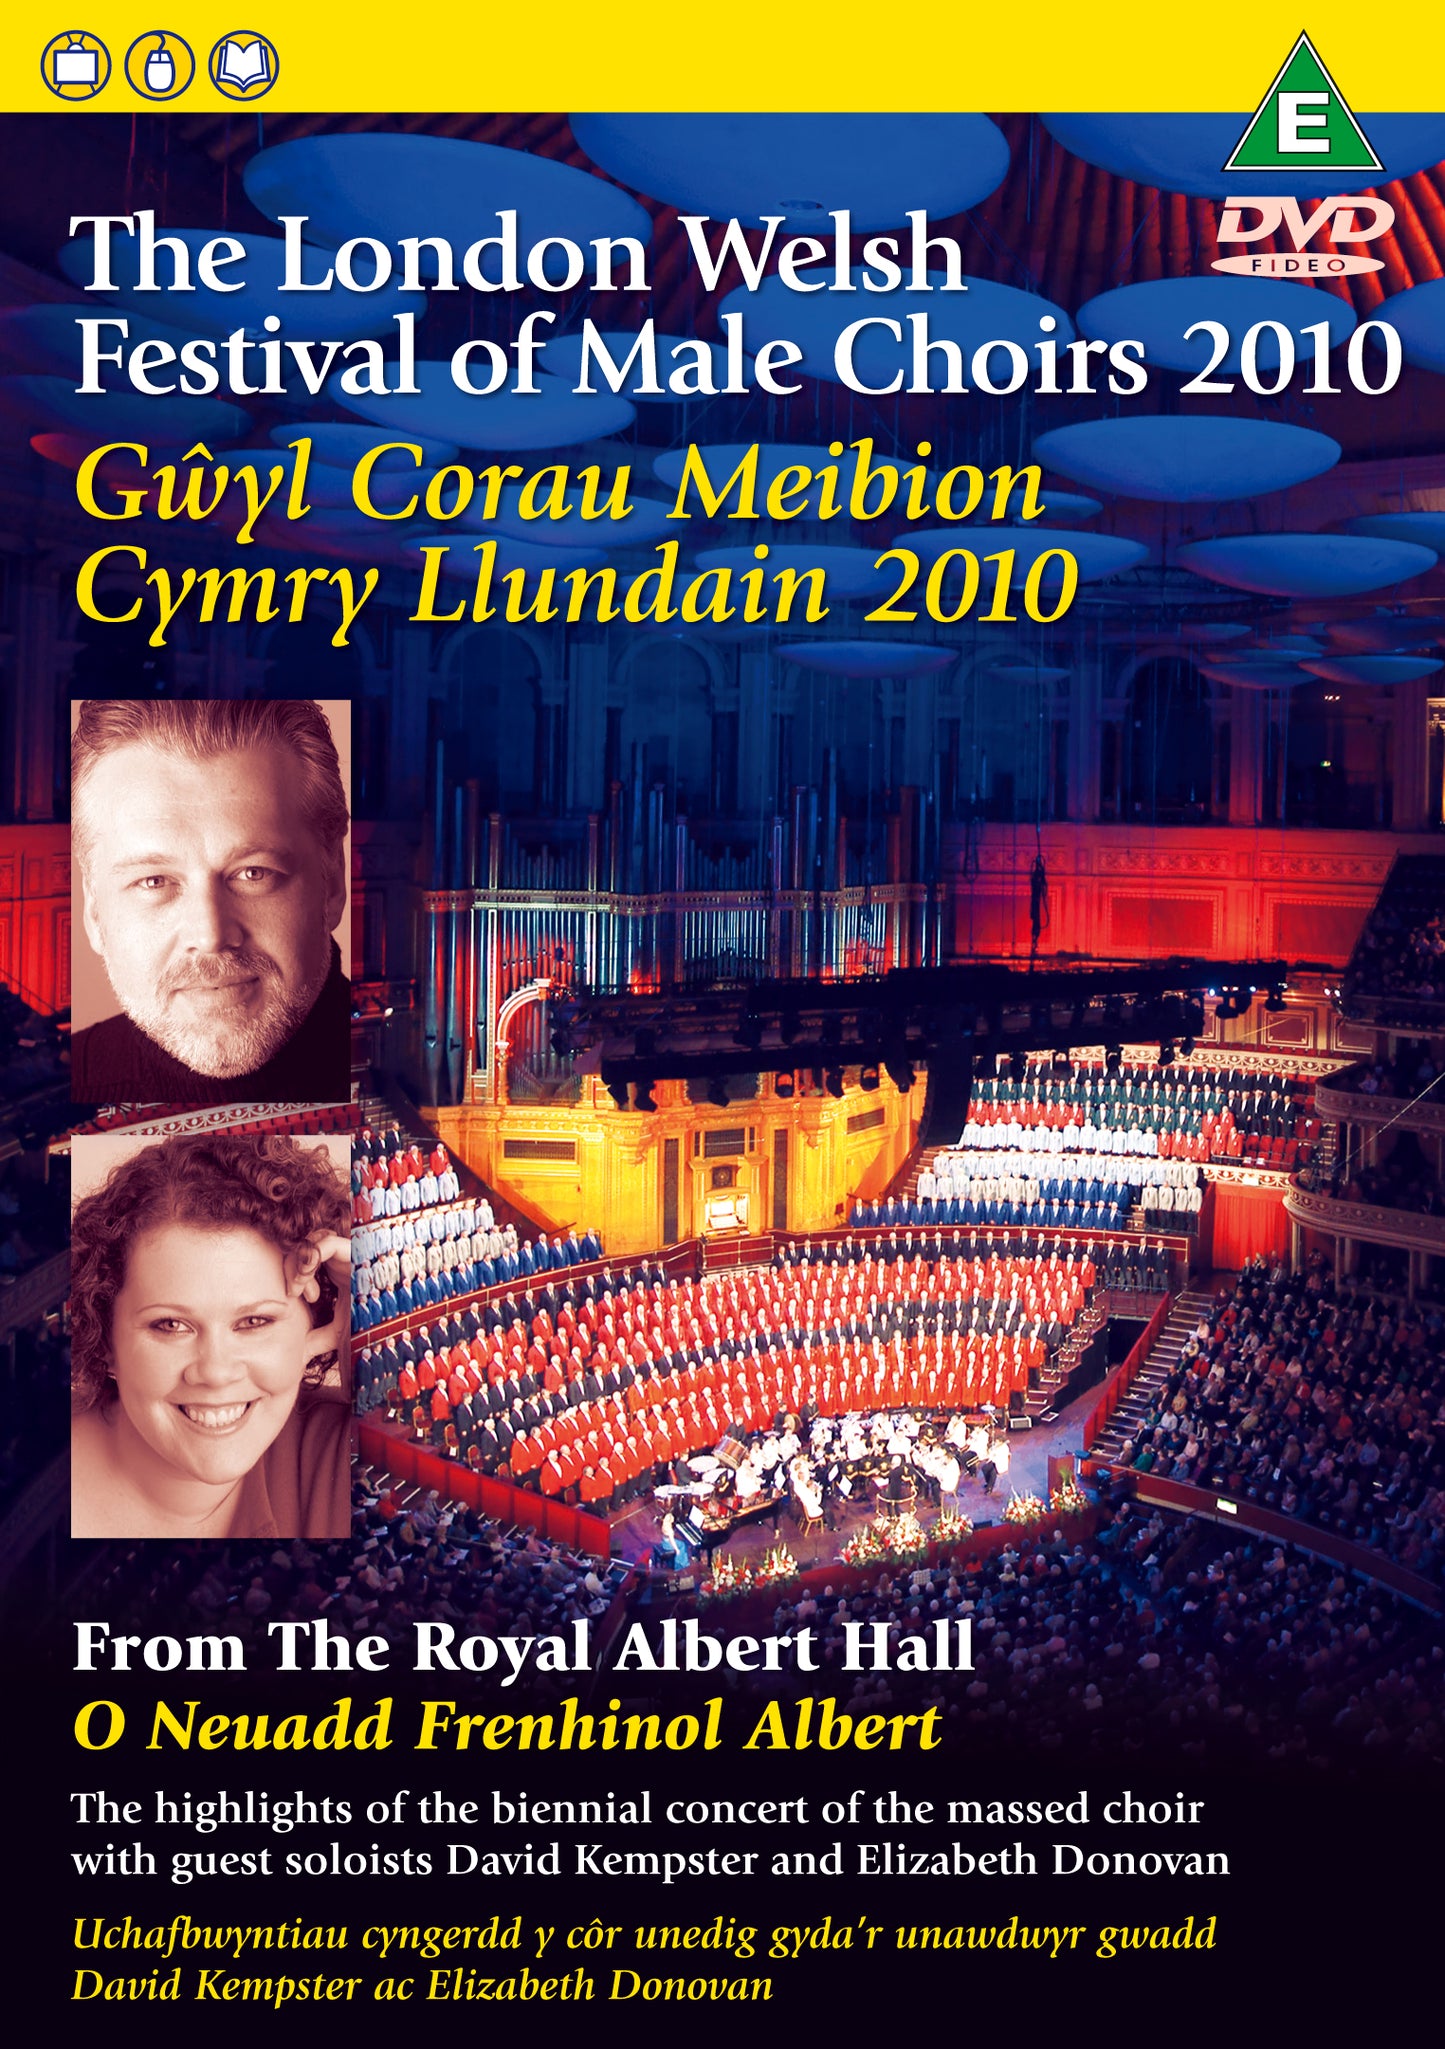 The London Welsh Festival of Male Choirs 2010